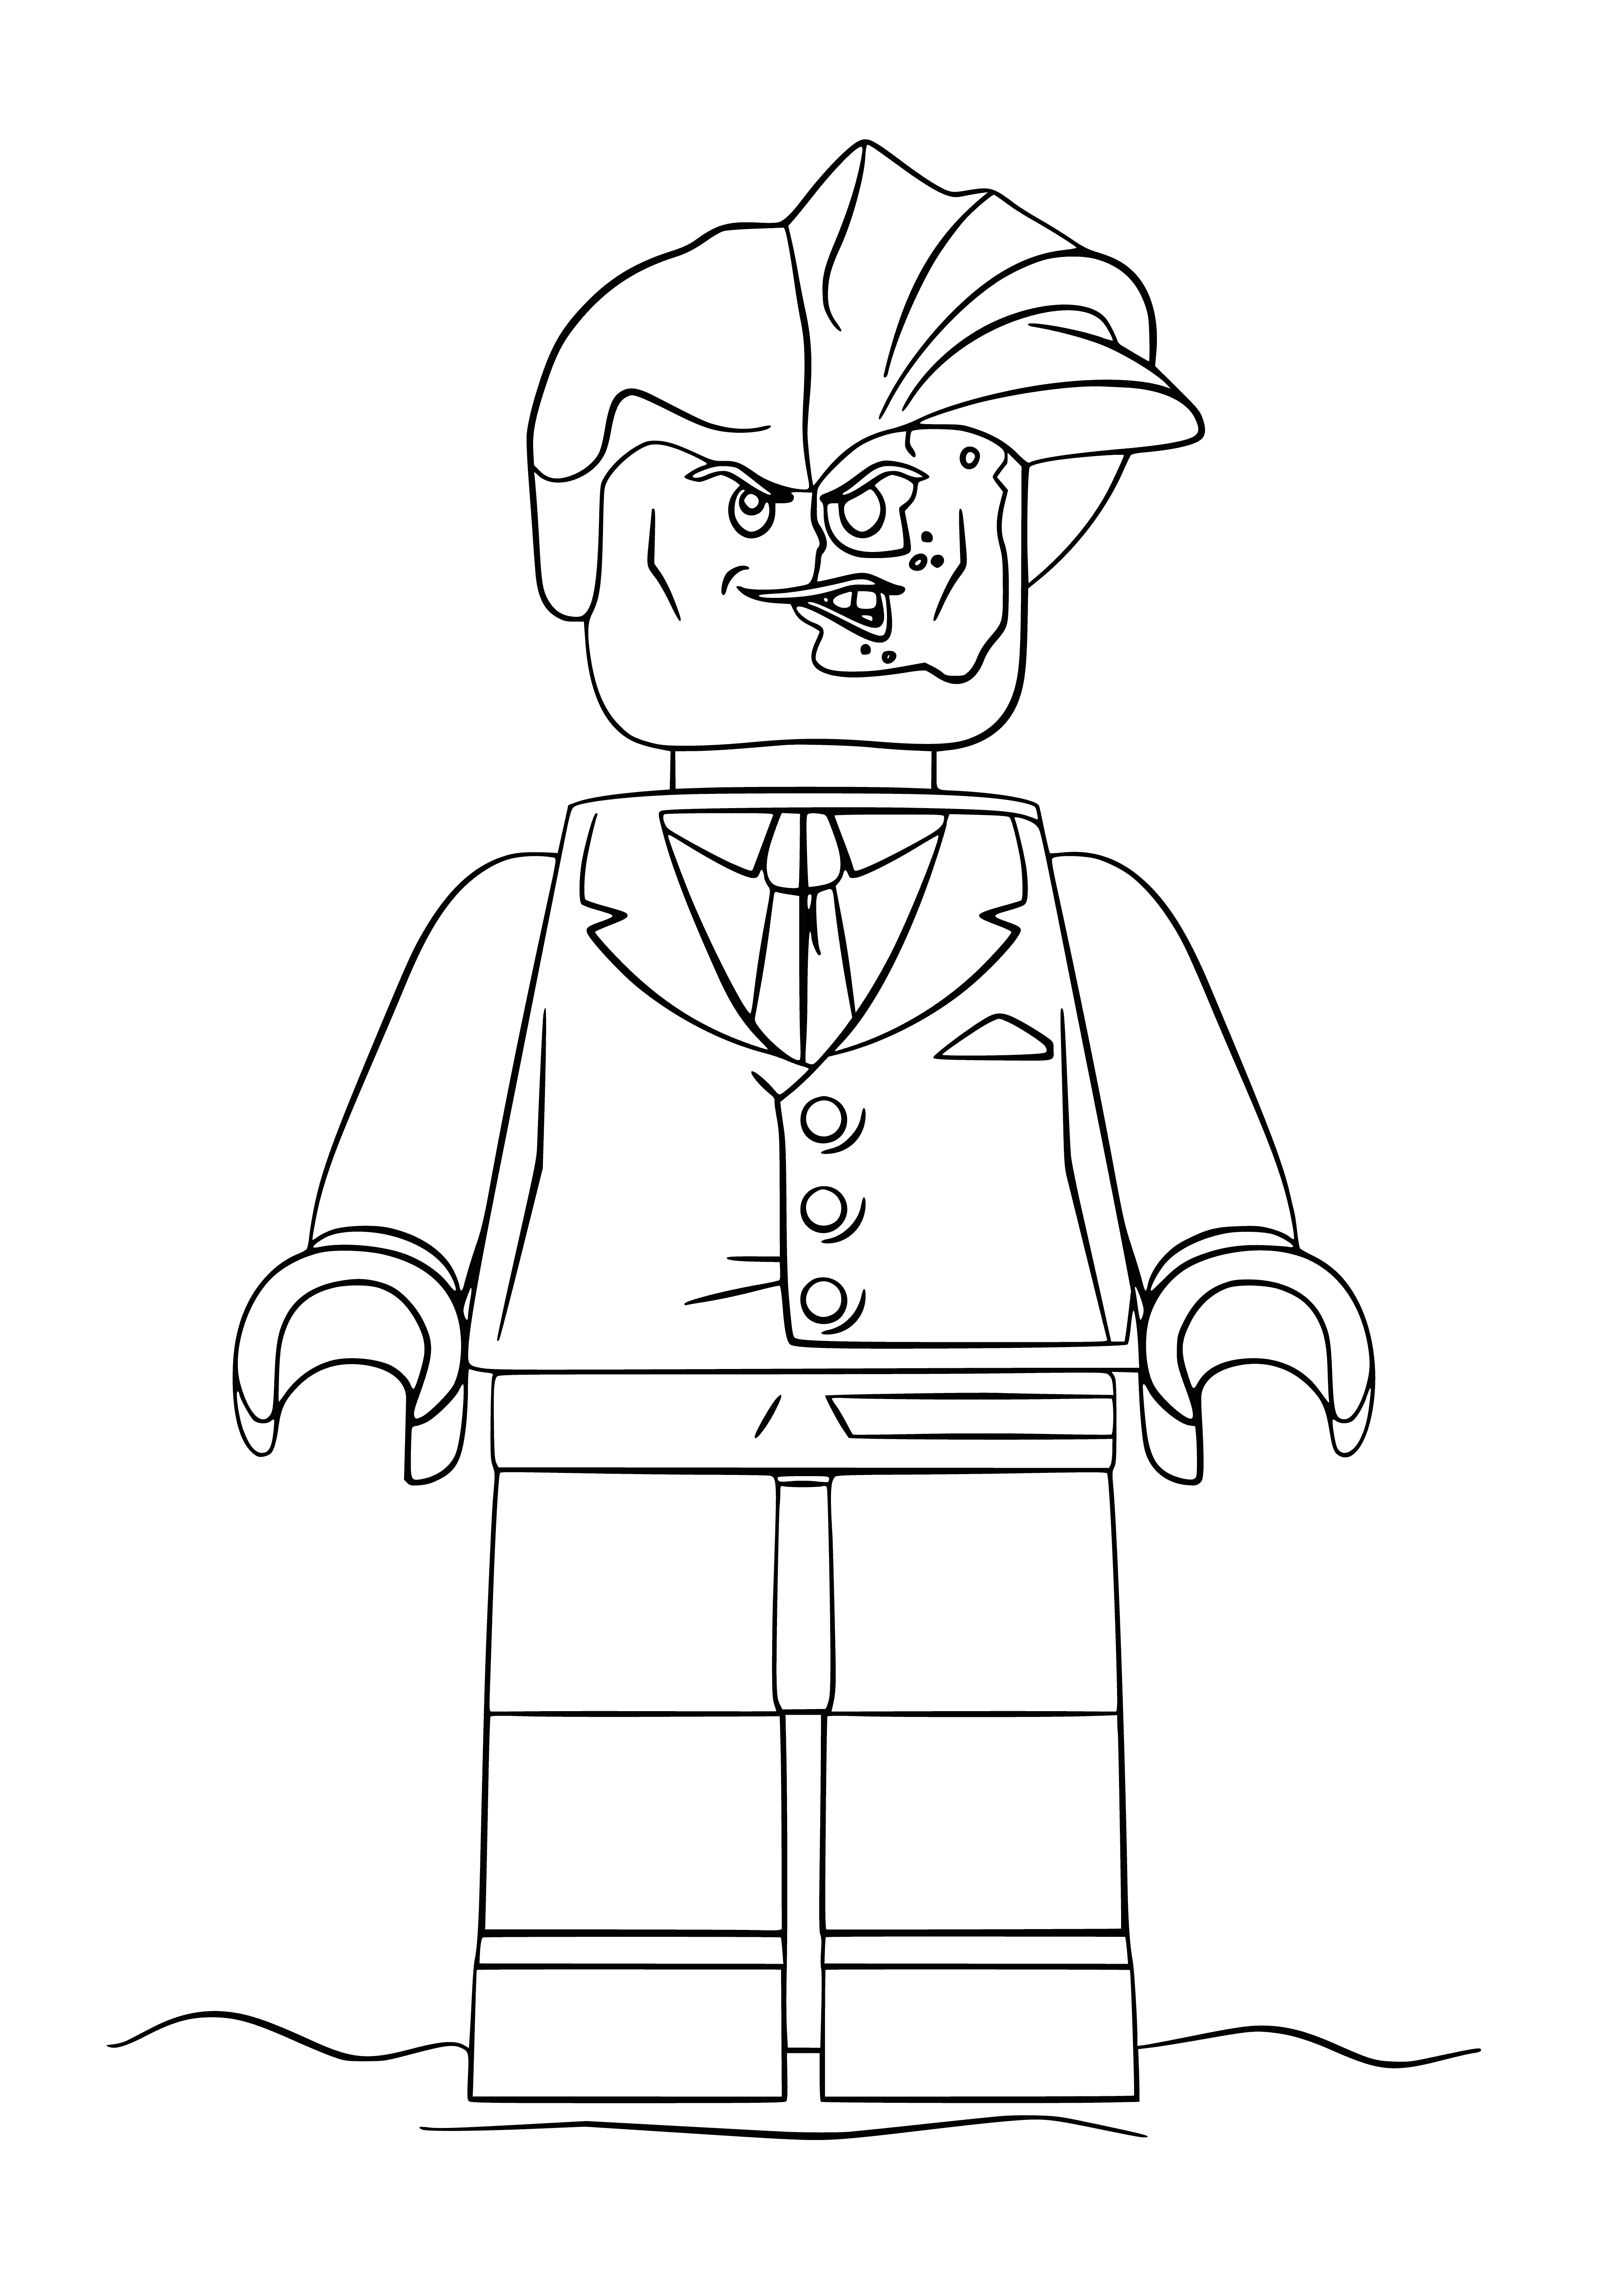 coloring page: LEGO Batman - Two-faced is a unique white/black figure with two interchangeable faces & holding batarangs. Great for imaginative play!